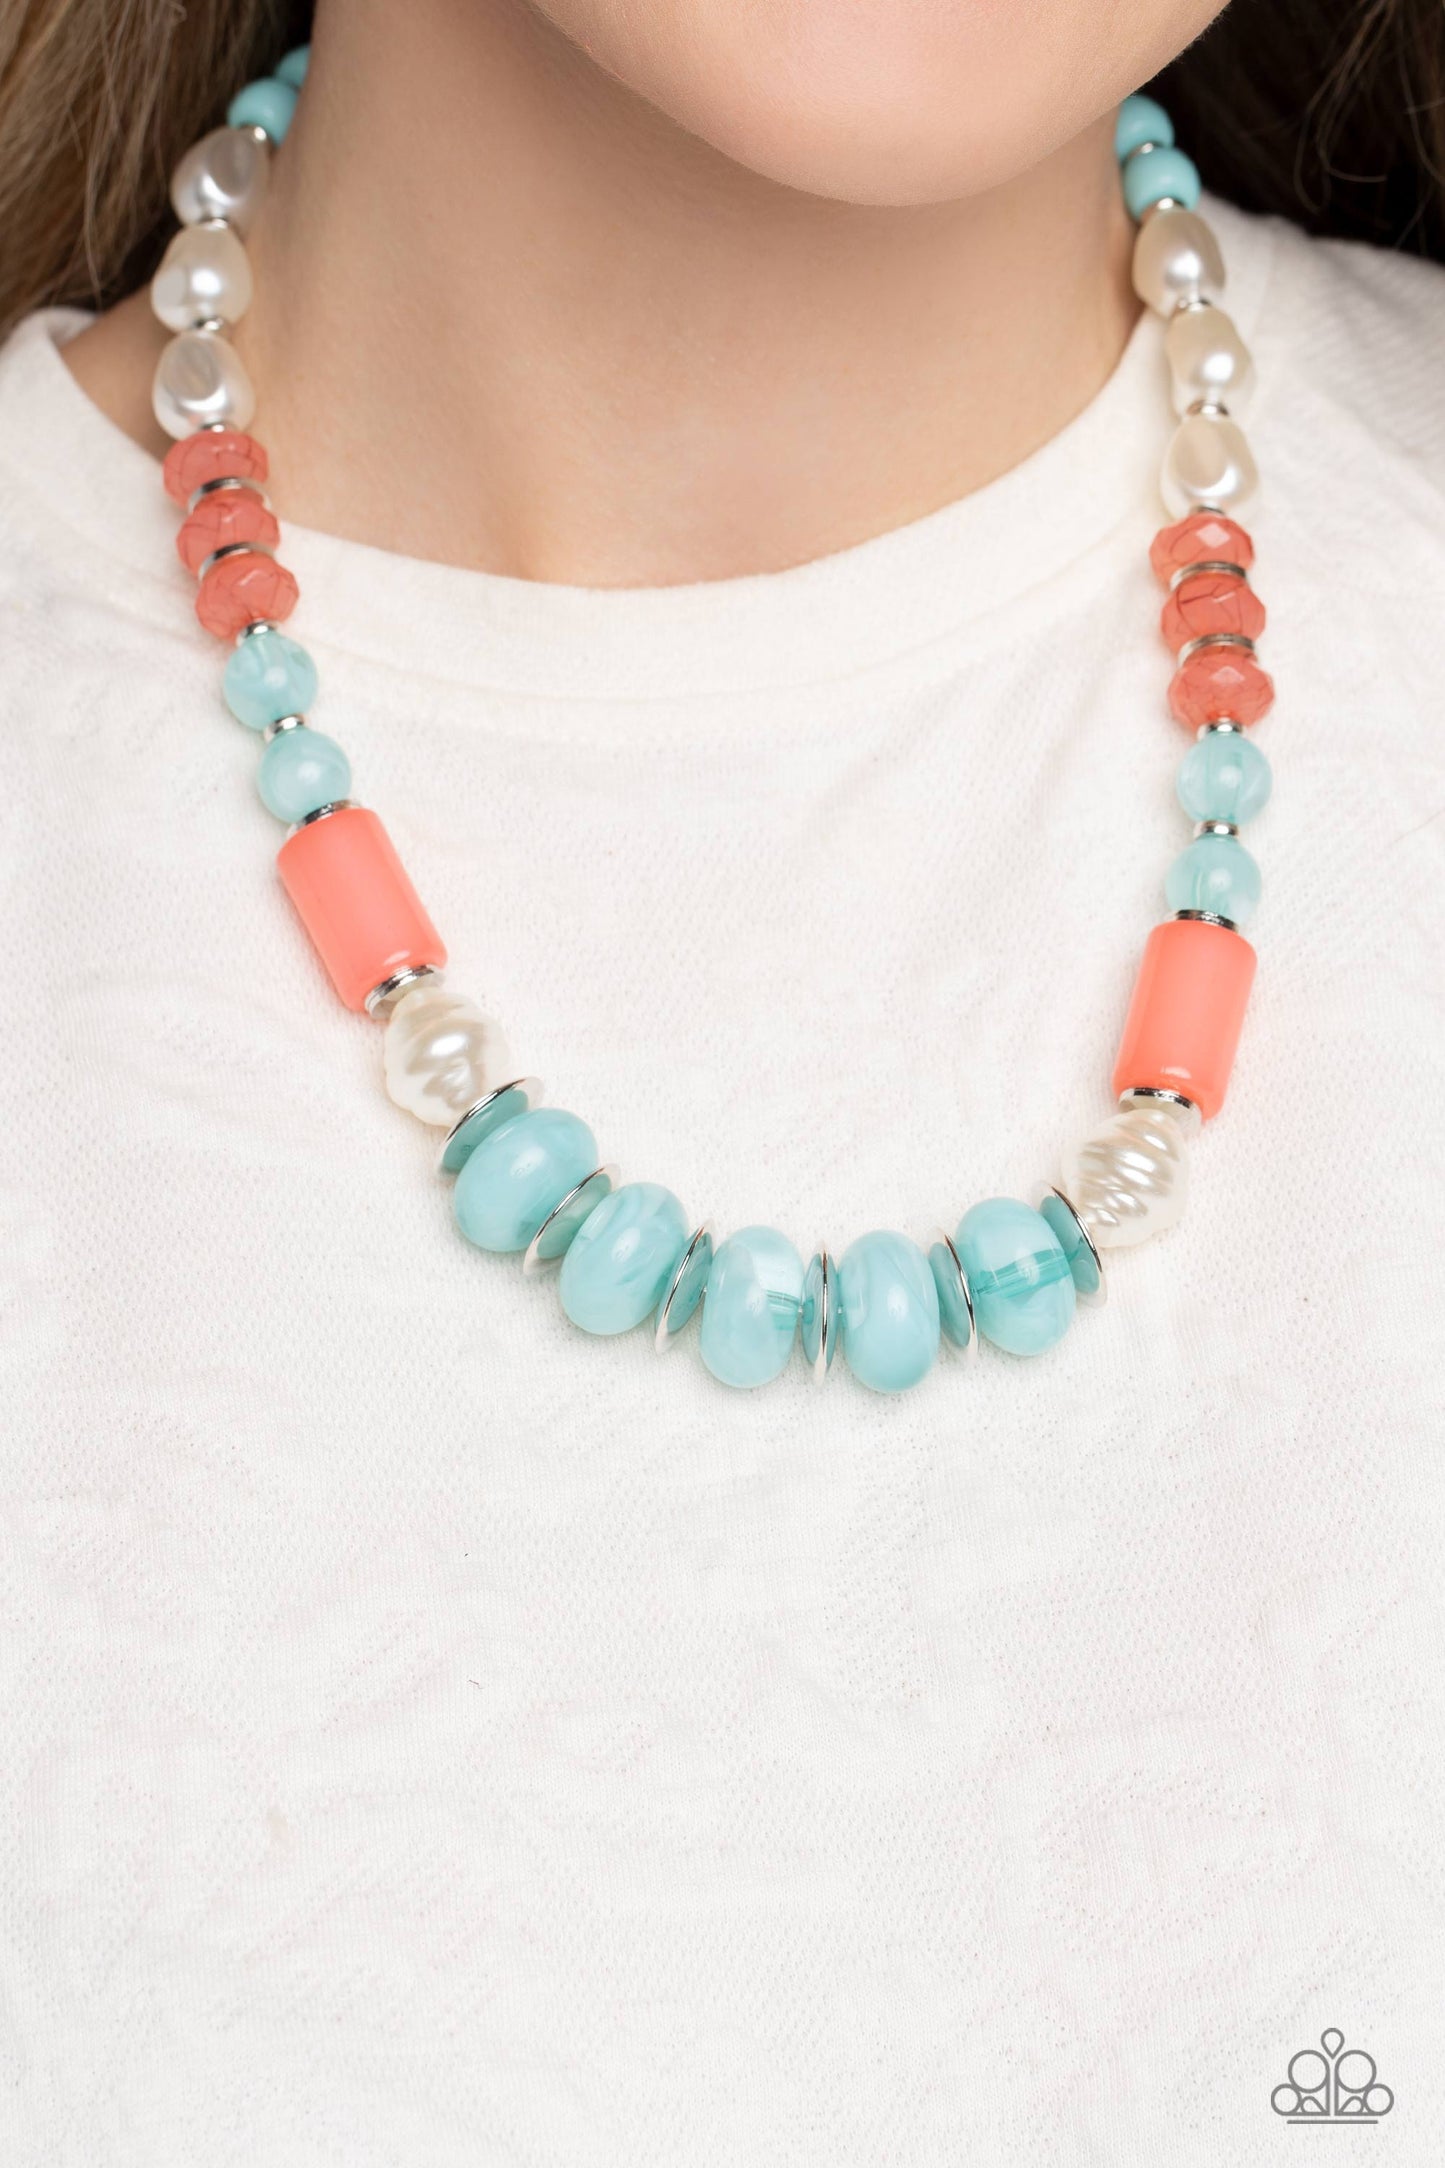 A SHEEN Slate Blue Necklace - Paparazzi Accessories  Silver accents and discs combine with a collection of solid, cloudy, and crackle beads in varying sizes and colors, to create a modern design threaded along a classic silver chain. The shades of Waterspout and coral create a vibrant and refreshing palette, with pearly white accents interspersed for a hint of refinement. Features an adjustable clasp closure.  Sold as one individual necklace. Includes one pair of matching earrings.  P2ST-BLXX-212XX